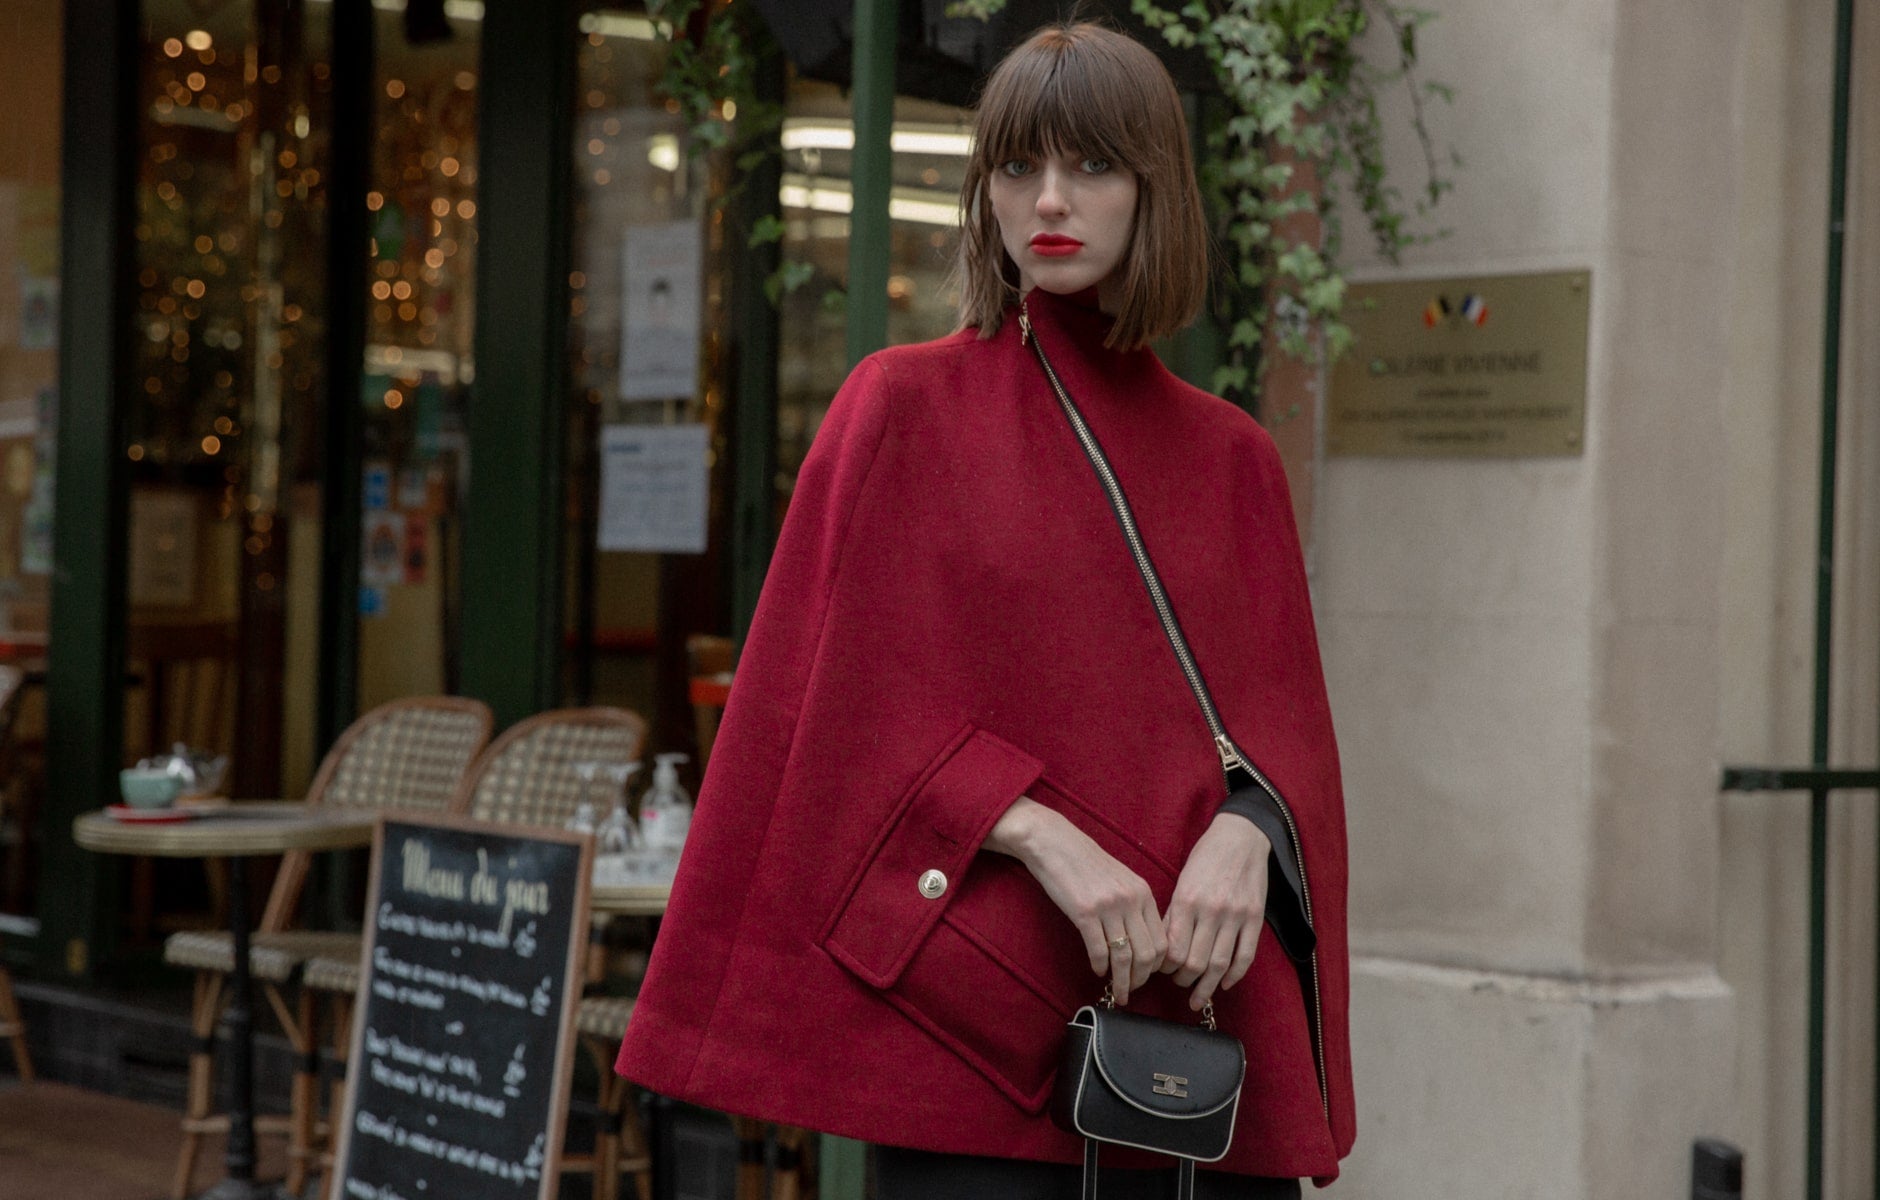 Red Cape with Gold Zipper and Buckle Details - ByQuaint